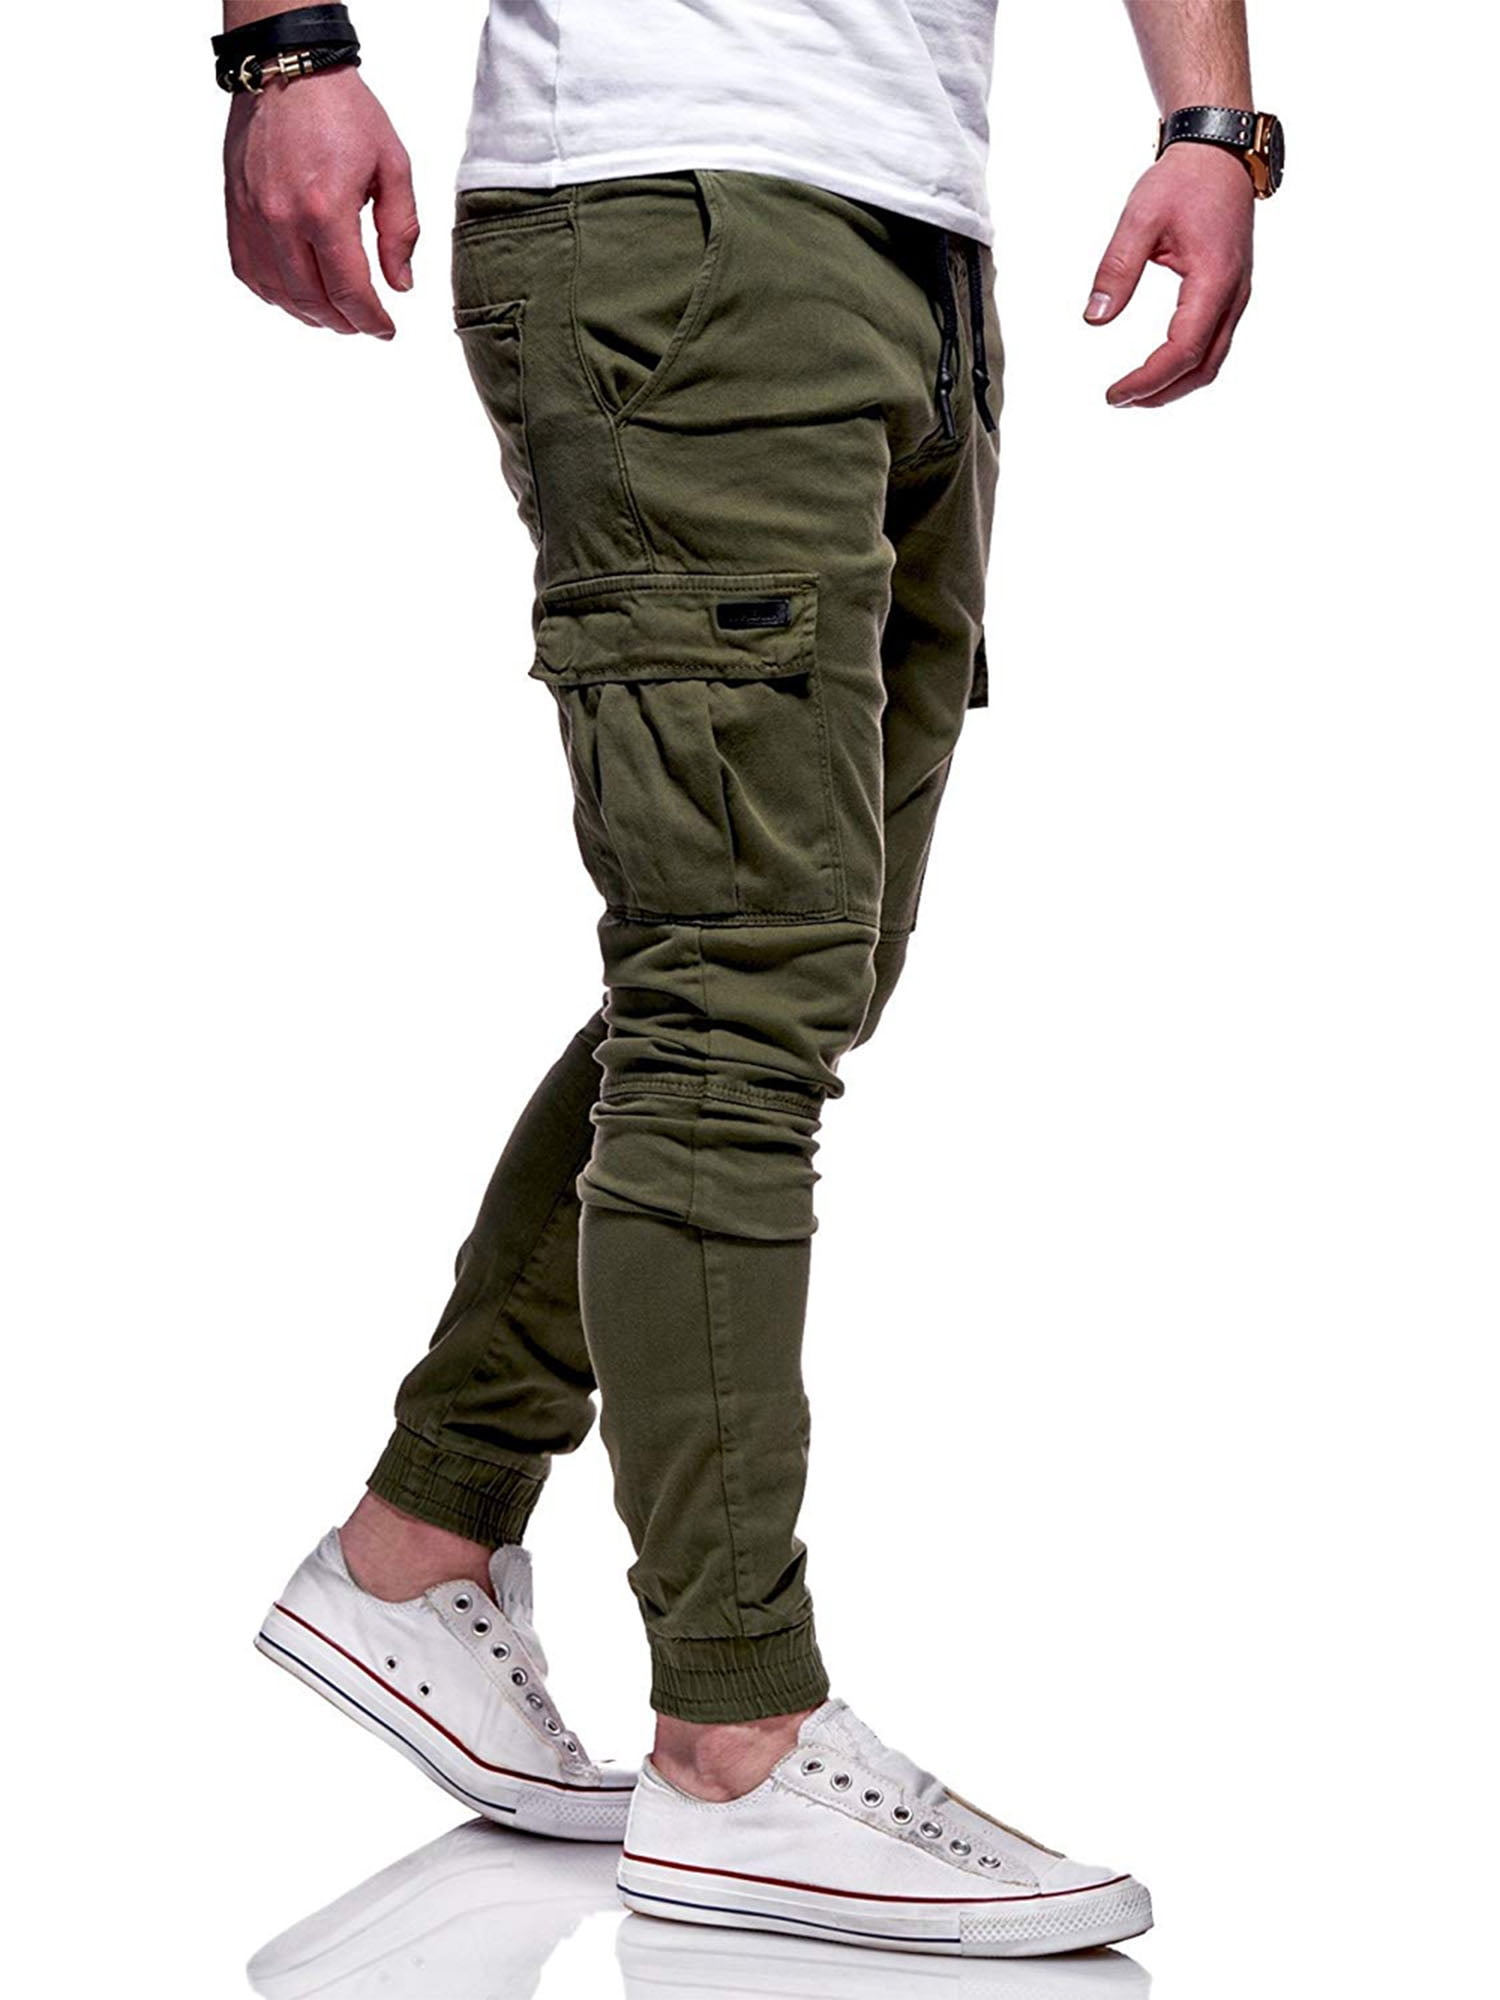 Elastic Waist Drawstring Cargo Pants Joggers Workout Sprots Trousers Pant LowProfile Sweatpants for Women with Pockets 